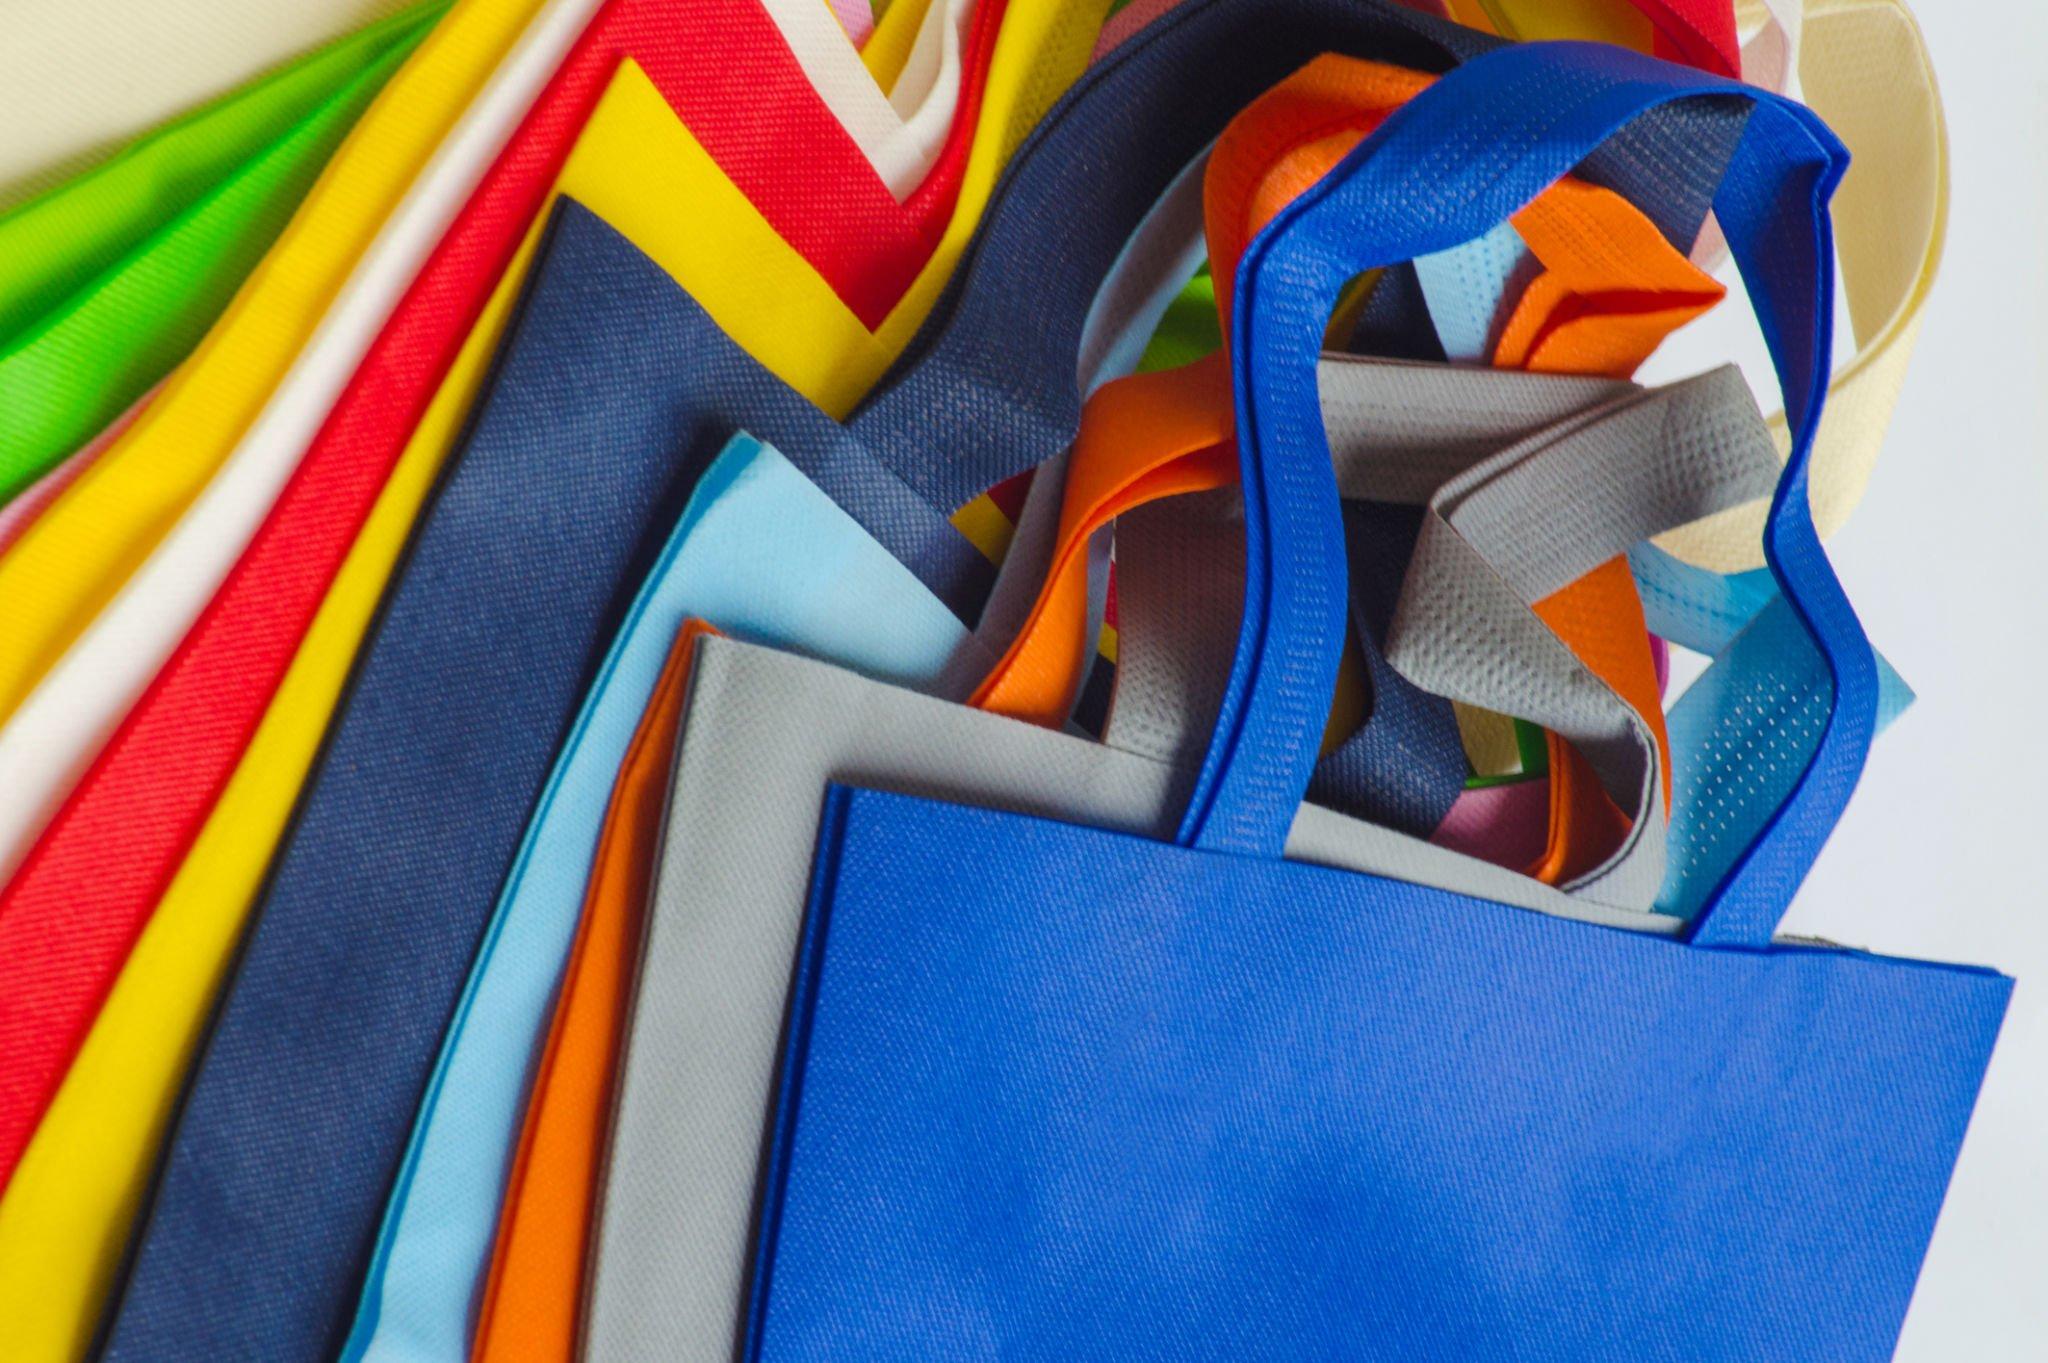 Top 6 Benefits of Non-Woven Bags Which You Should Know